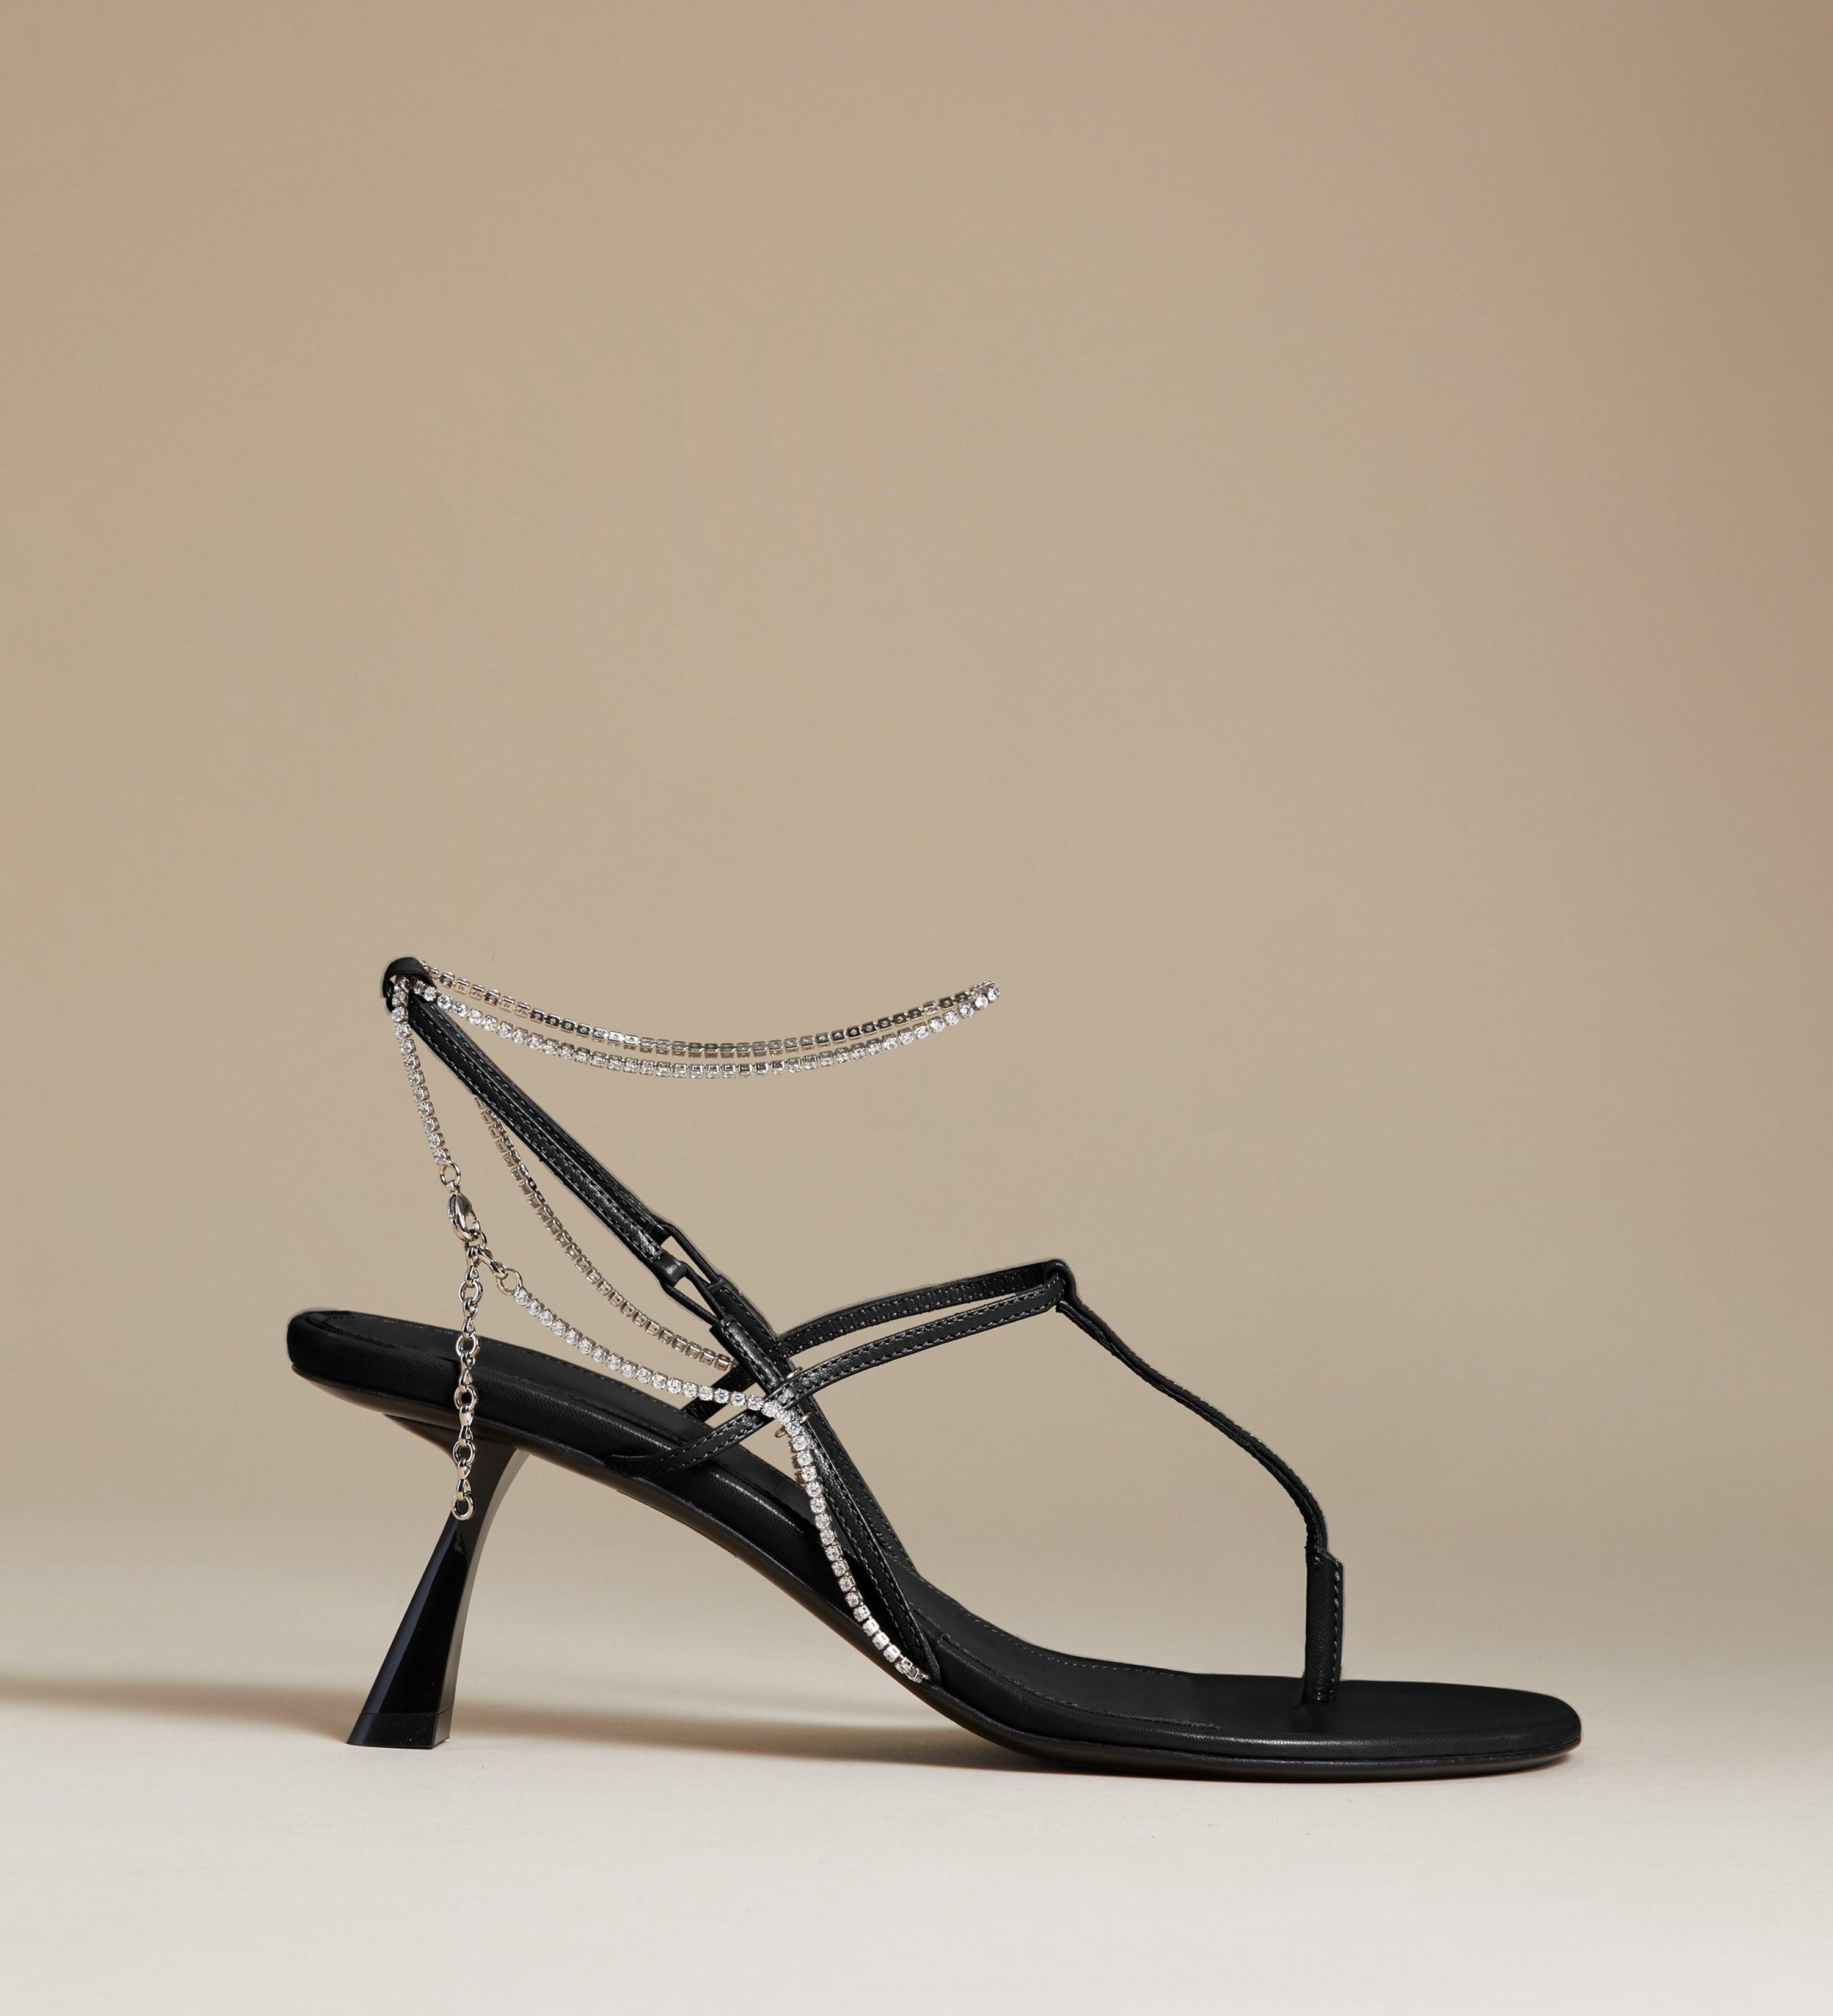 The Linden Sandal in Black with Crystals - The Iconic Issue